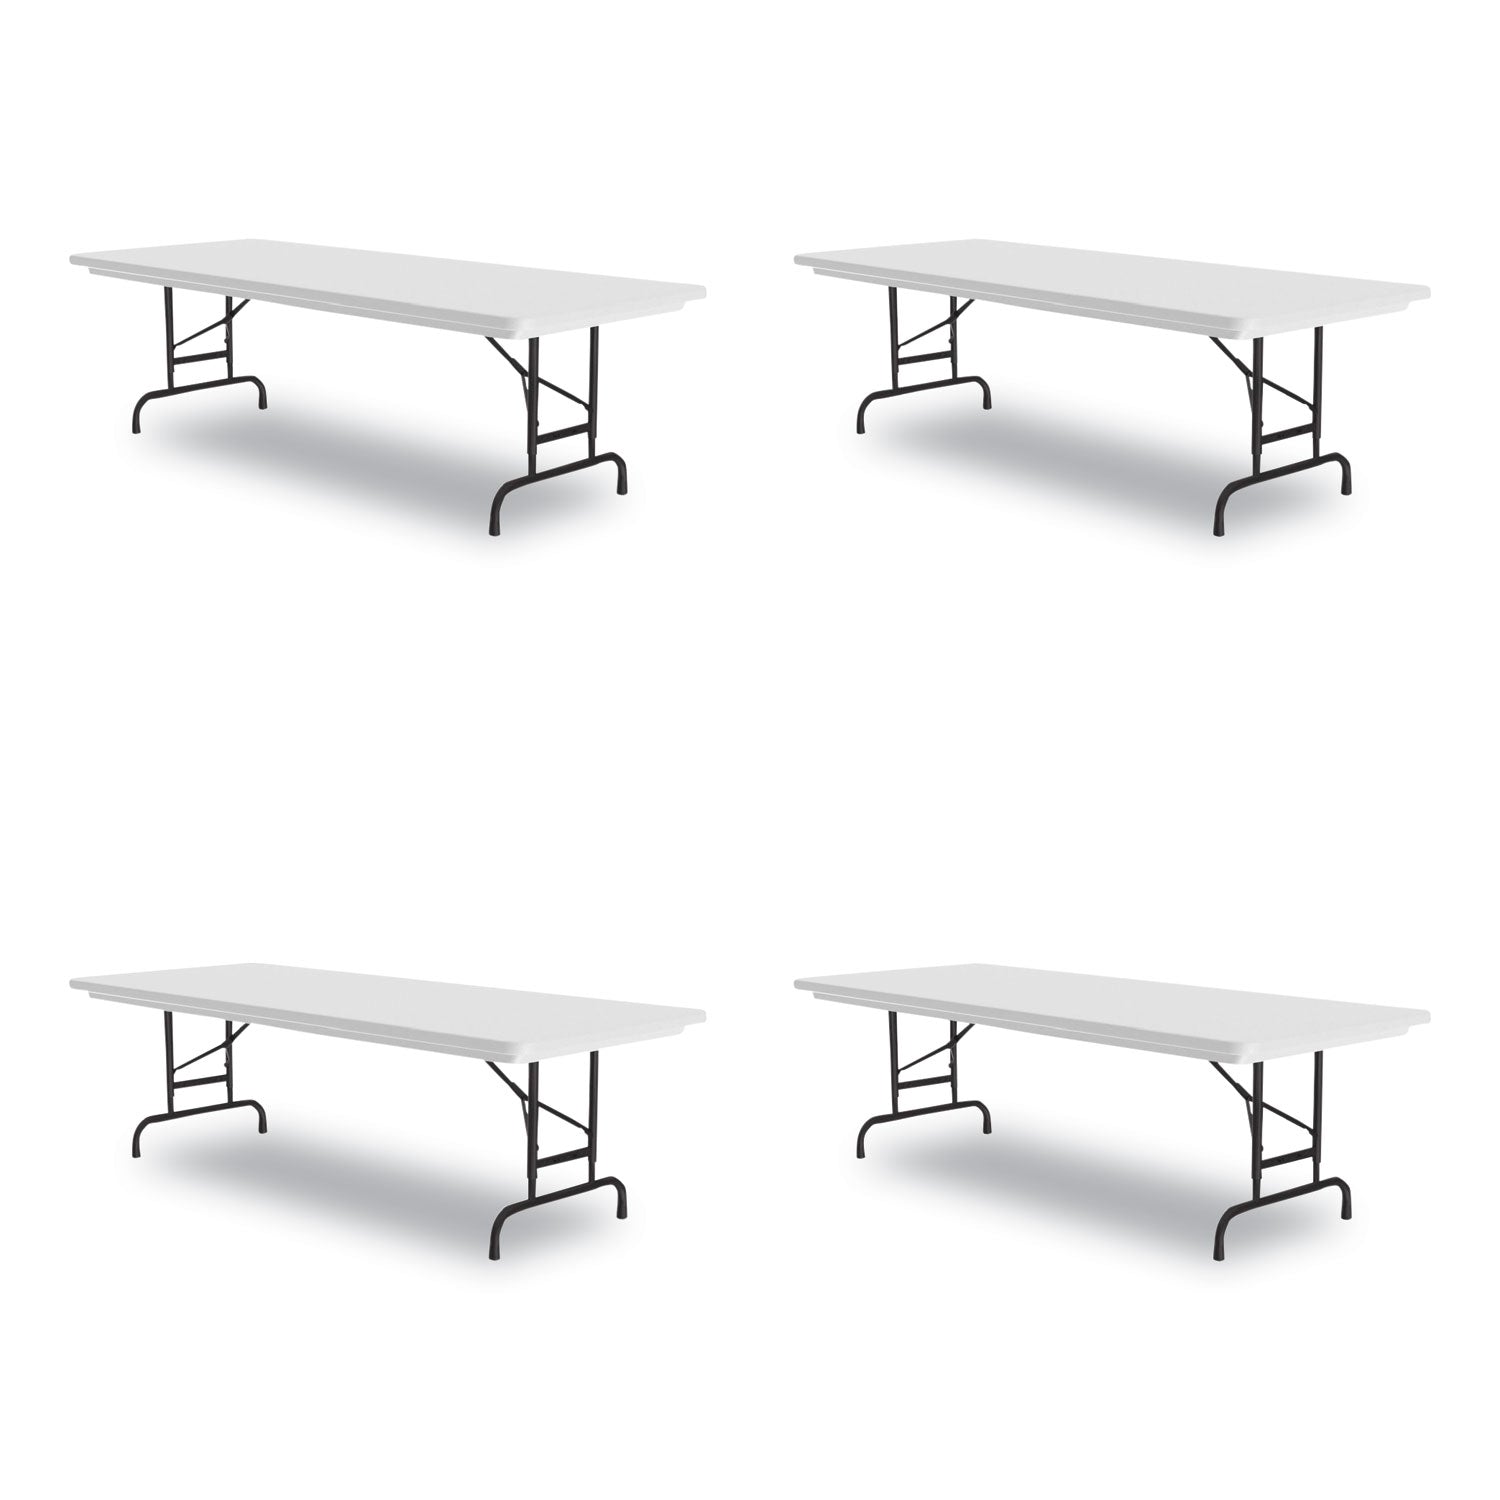 adjustable-folding-tables-rectangular-60-x-30-x-22-to-32-gray-top-black-legs-4-pallet-ships-in-4-6-business-days_crlra3060234p - 1